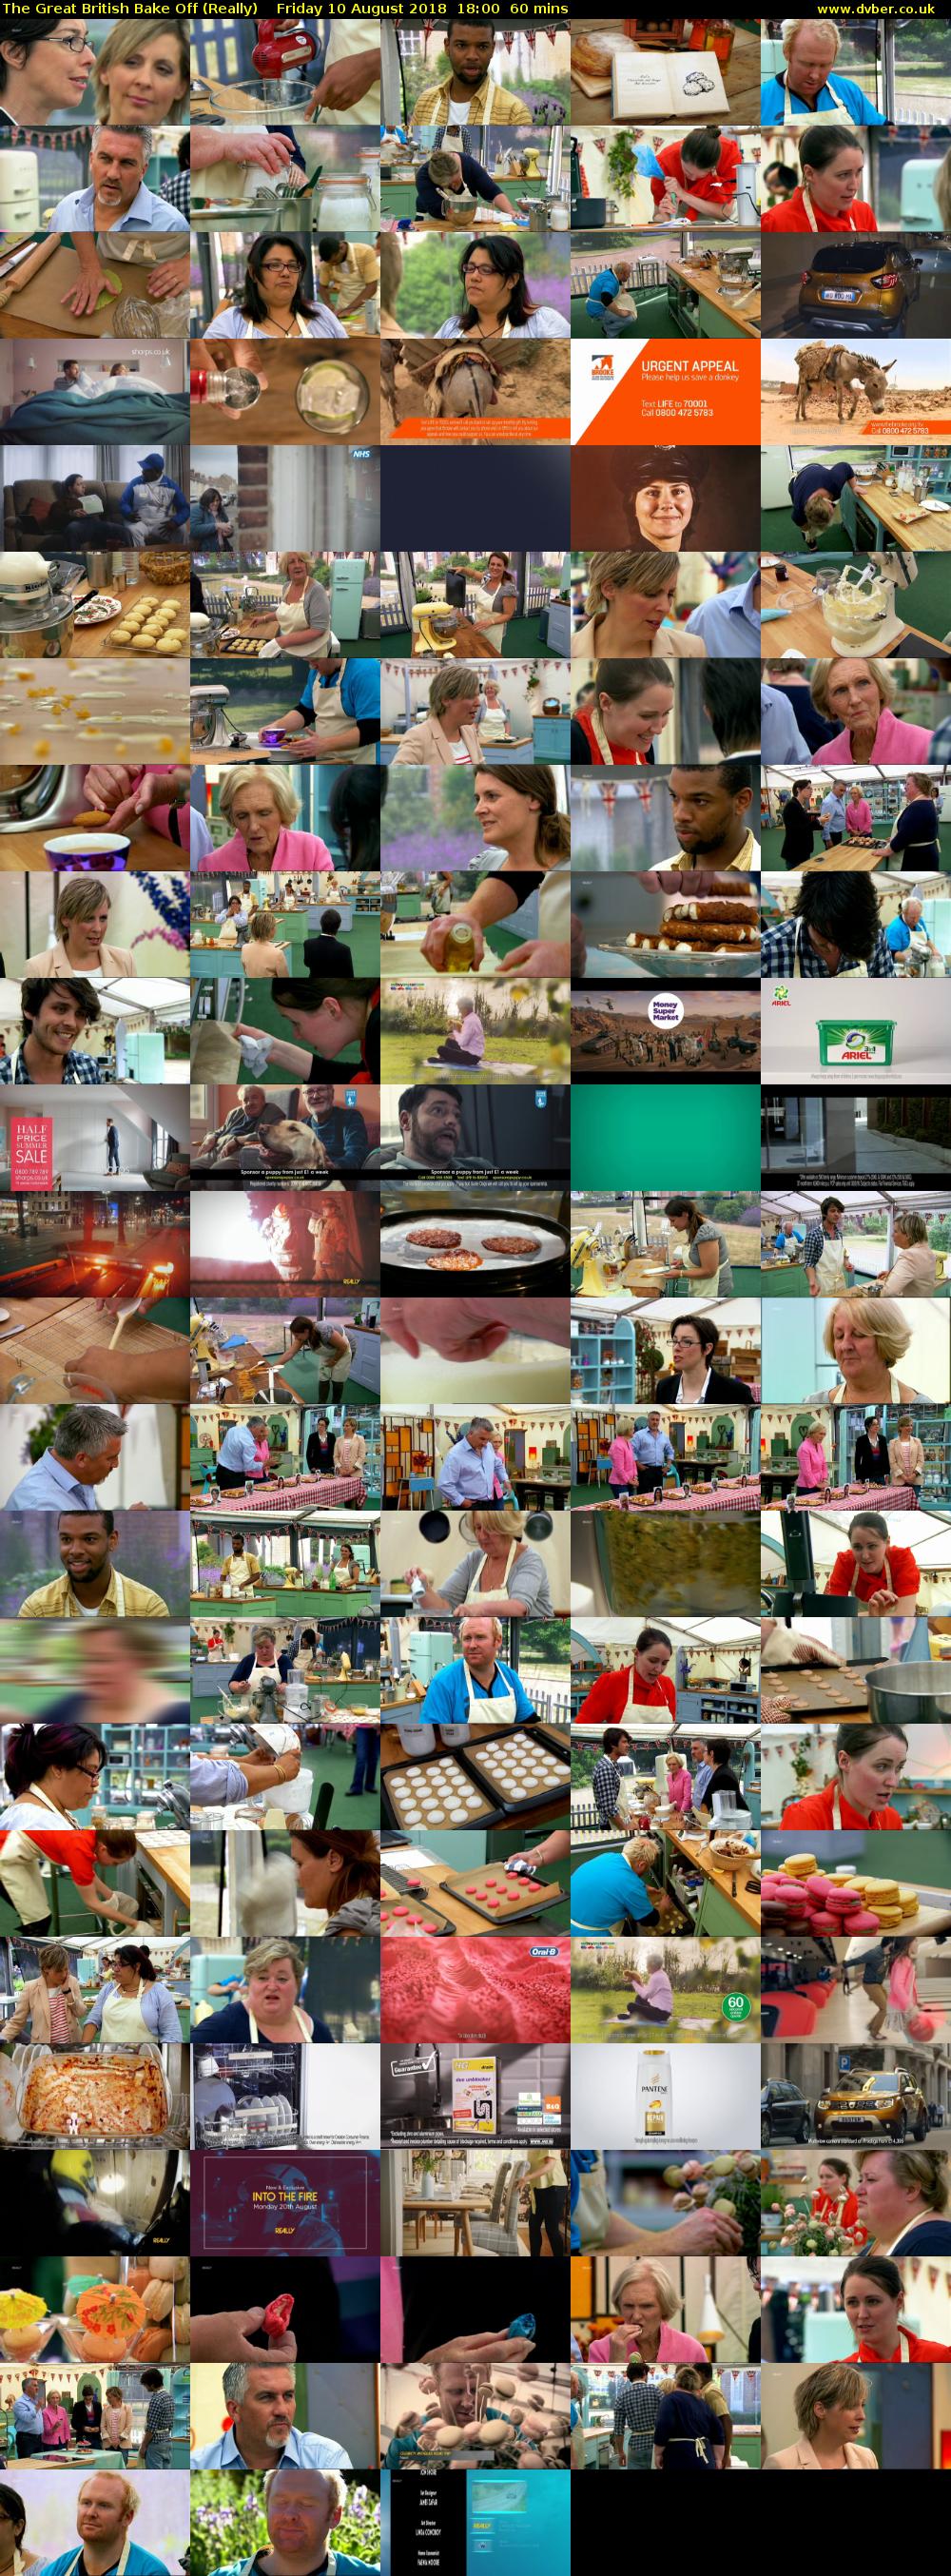 The Great British Bake Off (Really) Friday 10 August 2018 18:00 - 19:00